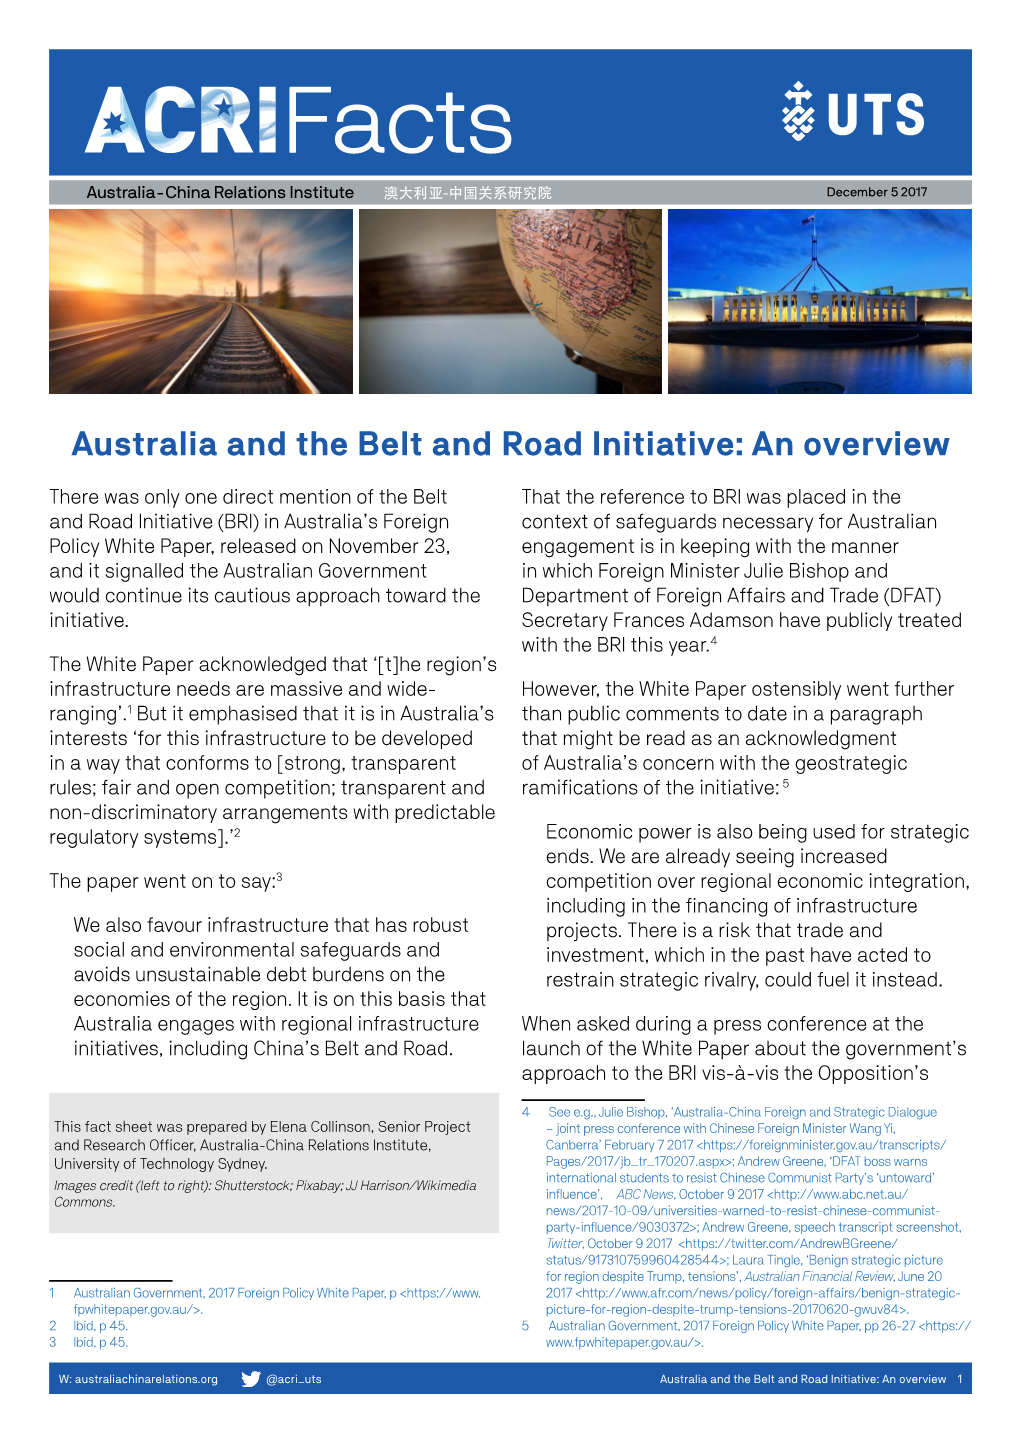 Australia and the Belt and Road Initiative: an Overview